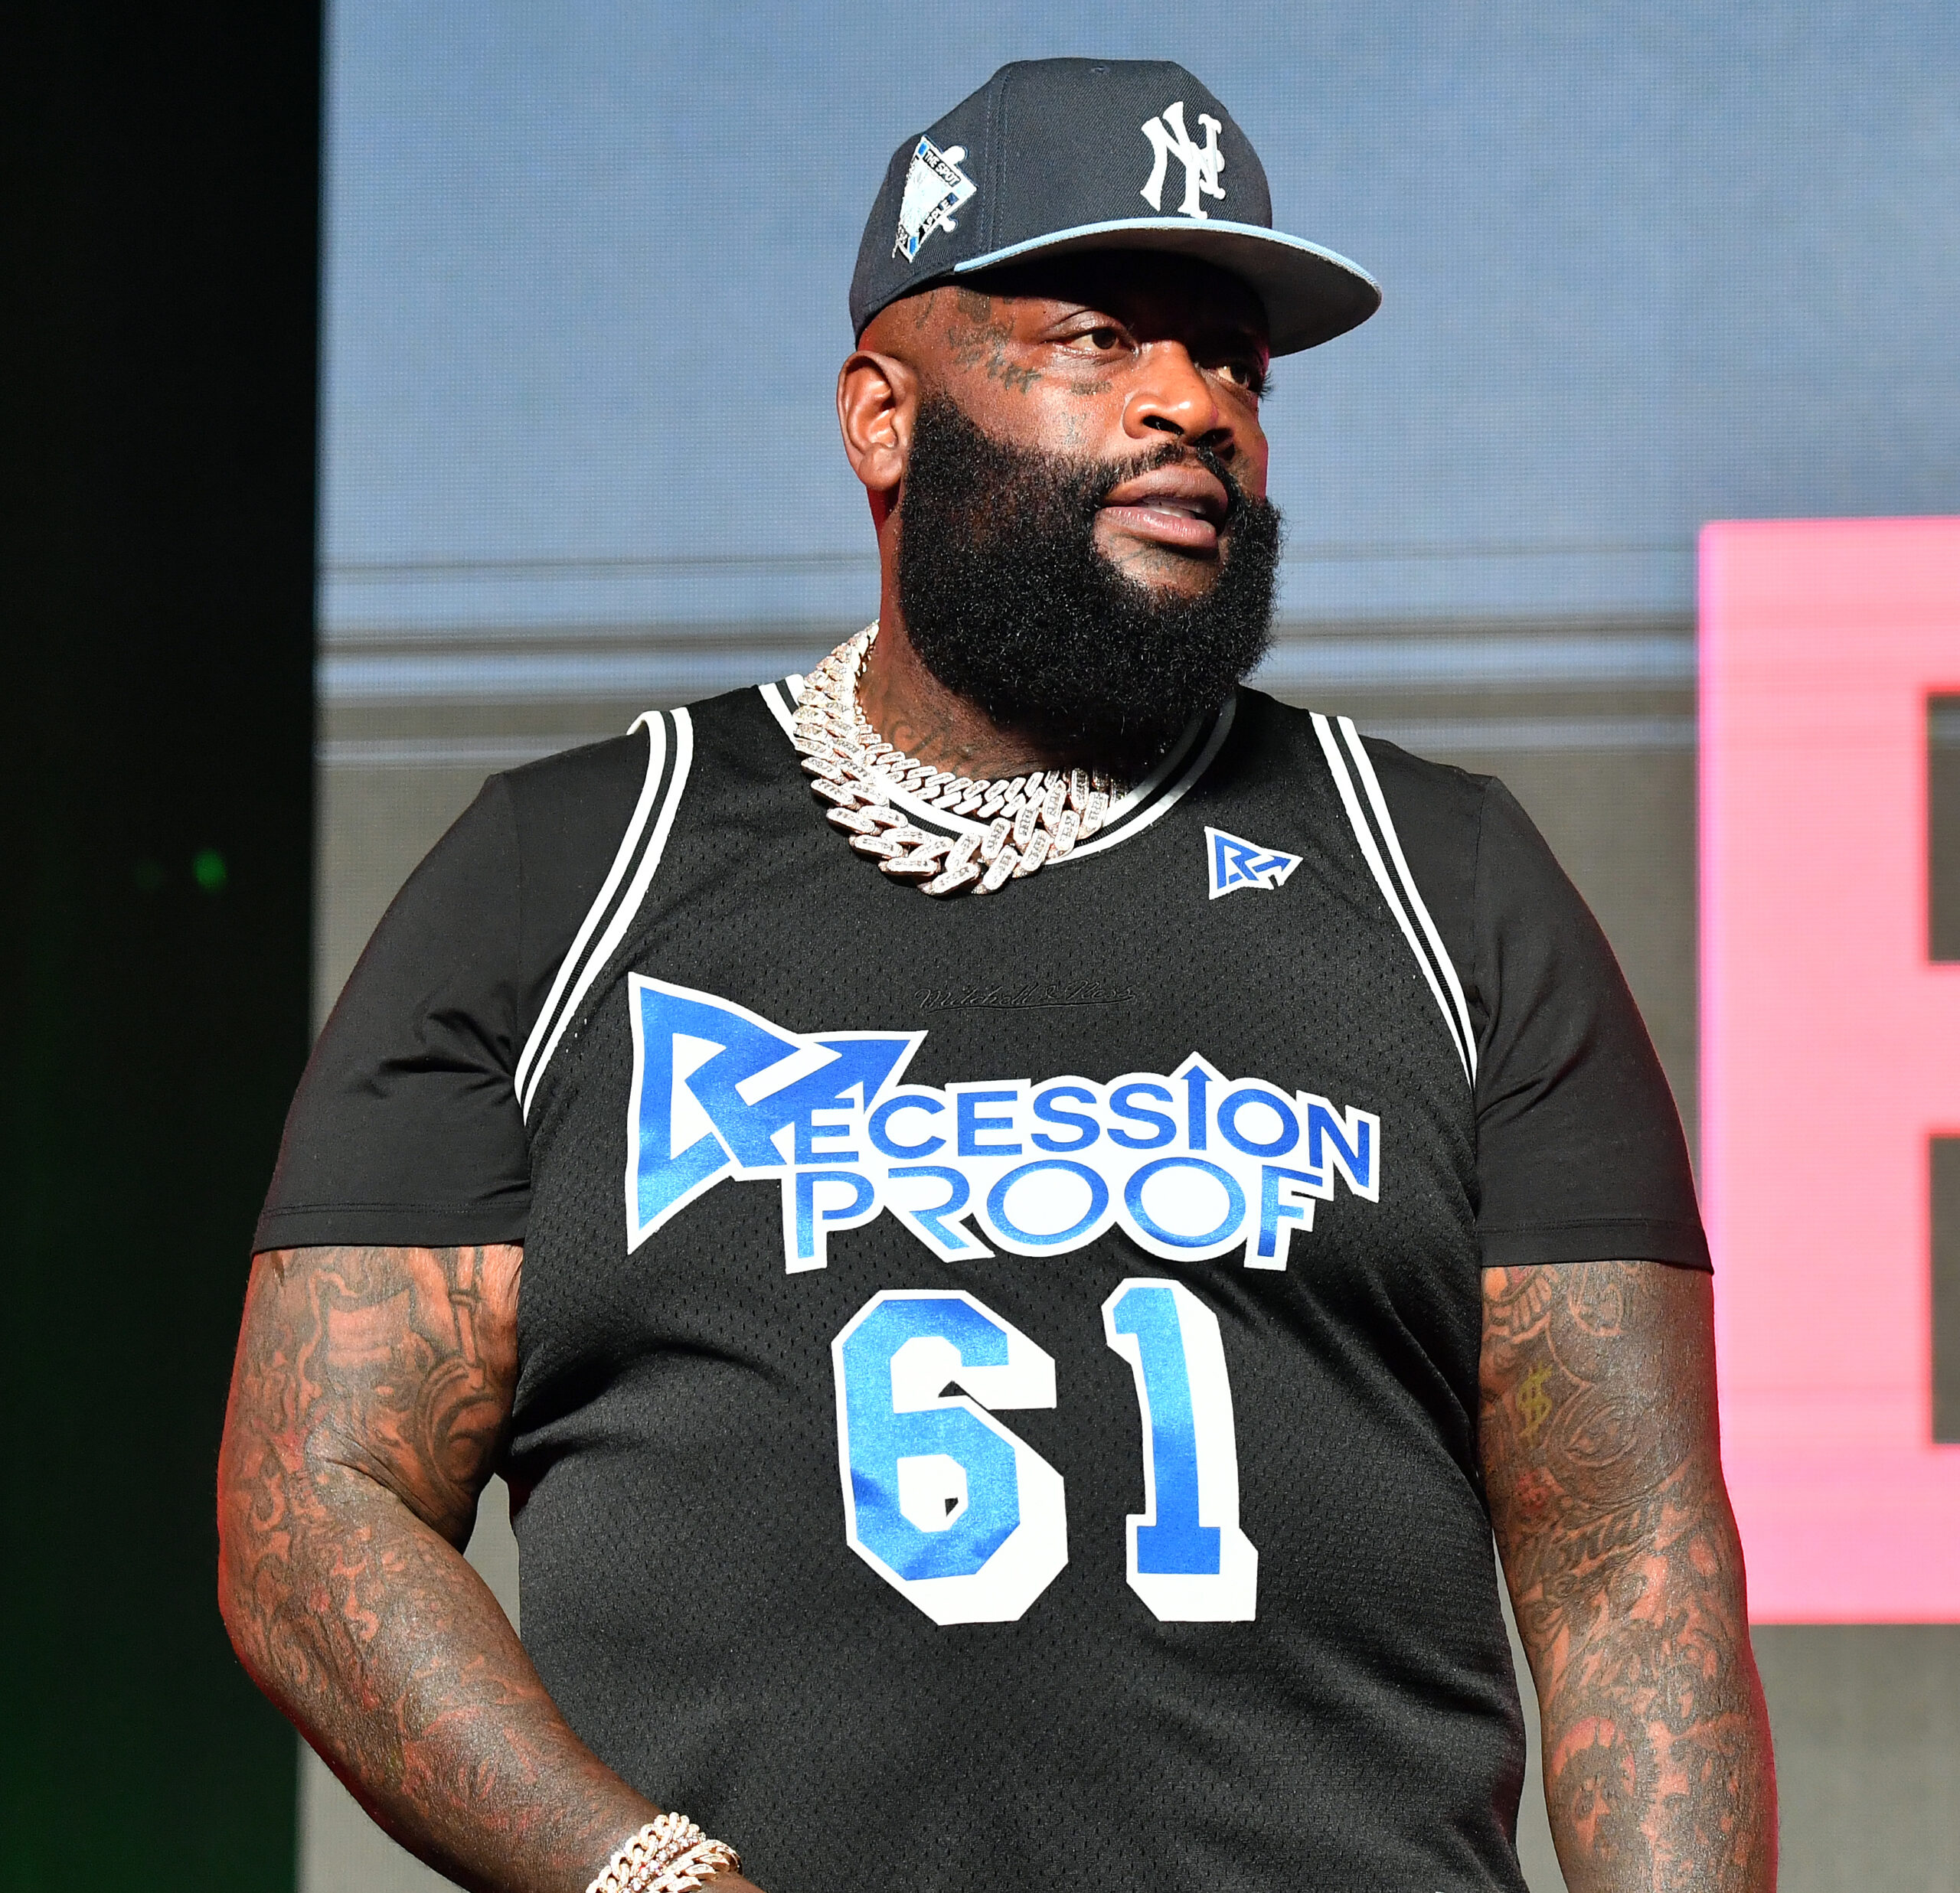 Rick Ross Upsets South Fulton Residents Due To Trashed Plaza Following Car Show